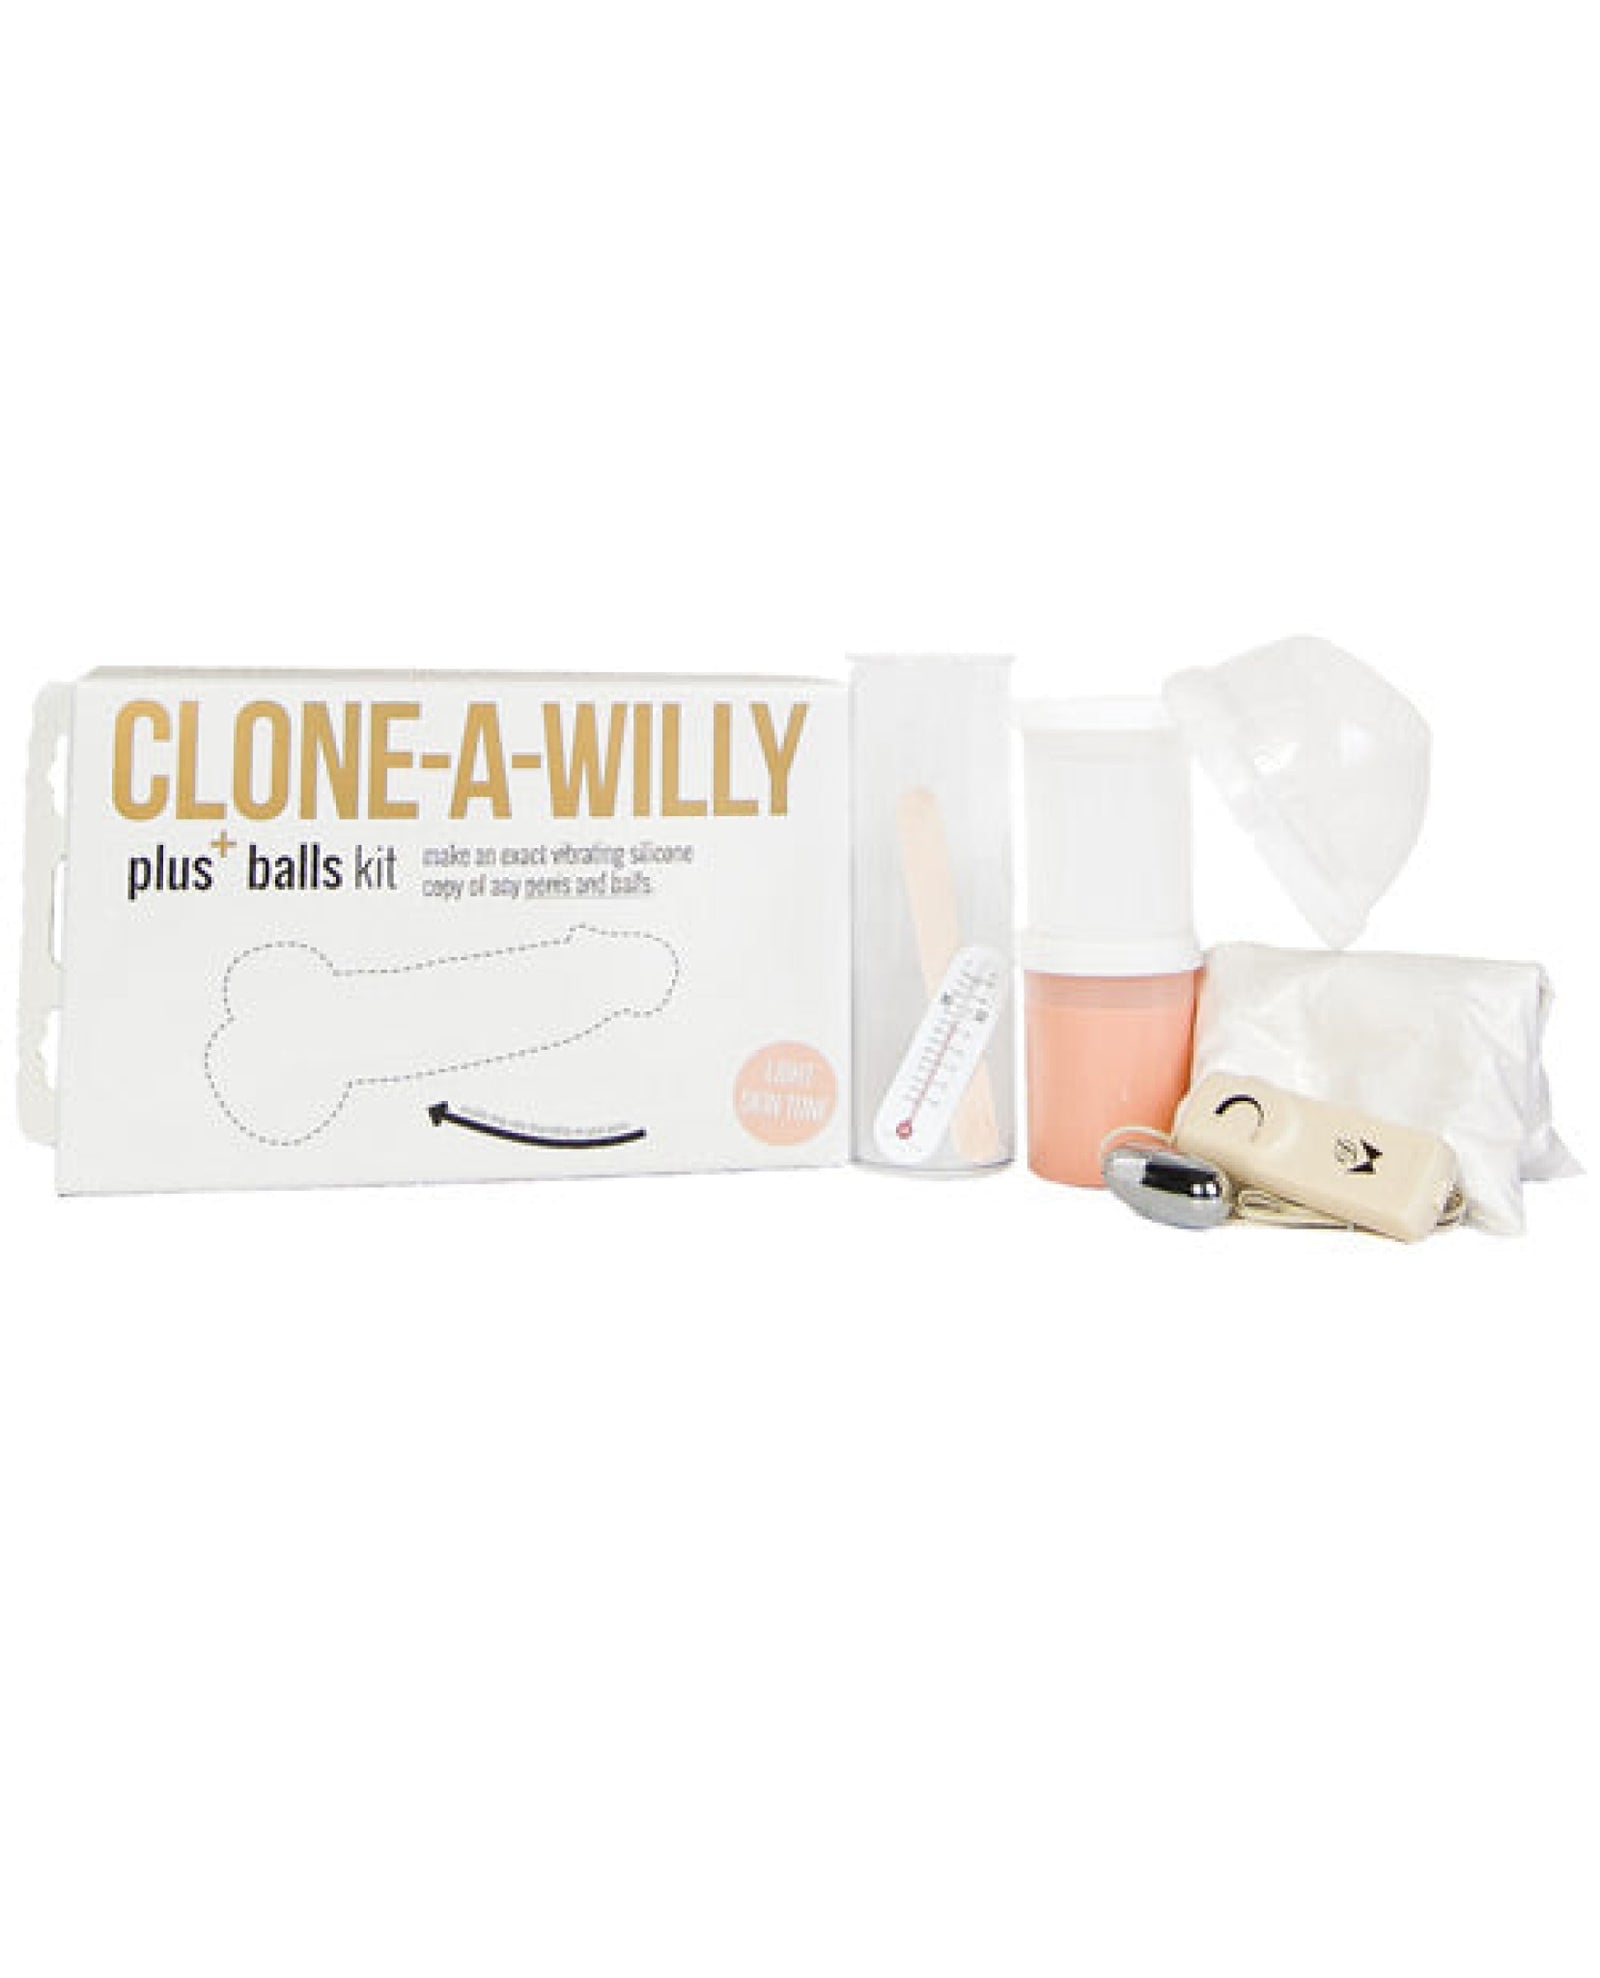 Clone-a-willy Plus+ Balls Kit - Light Tone Clone A Willy